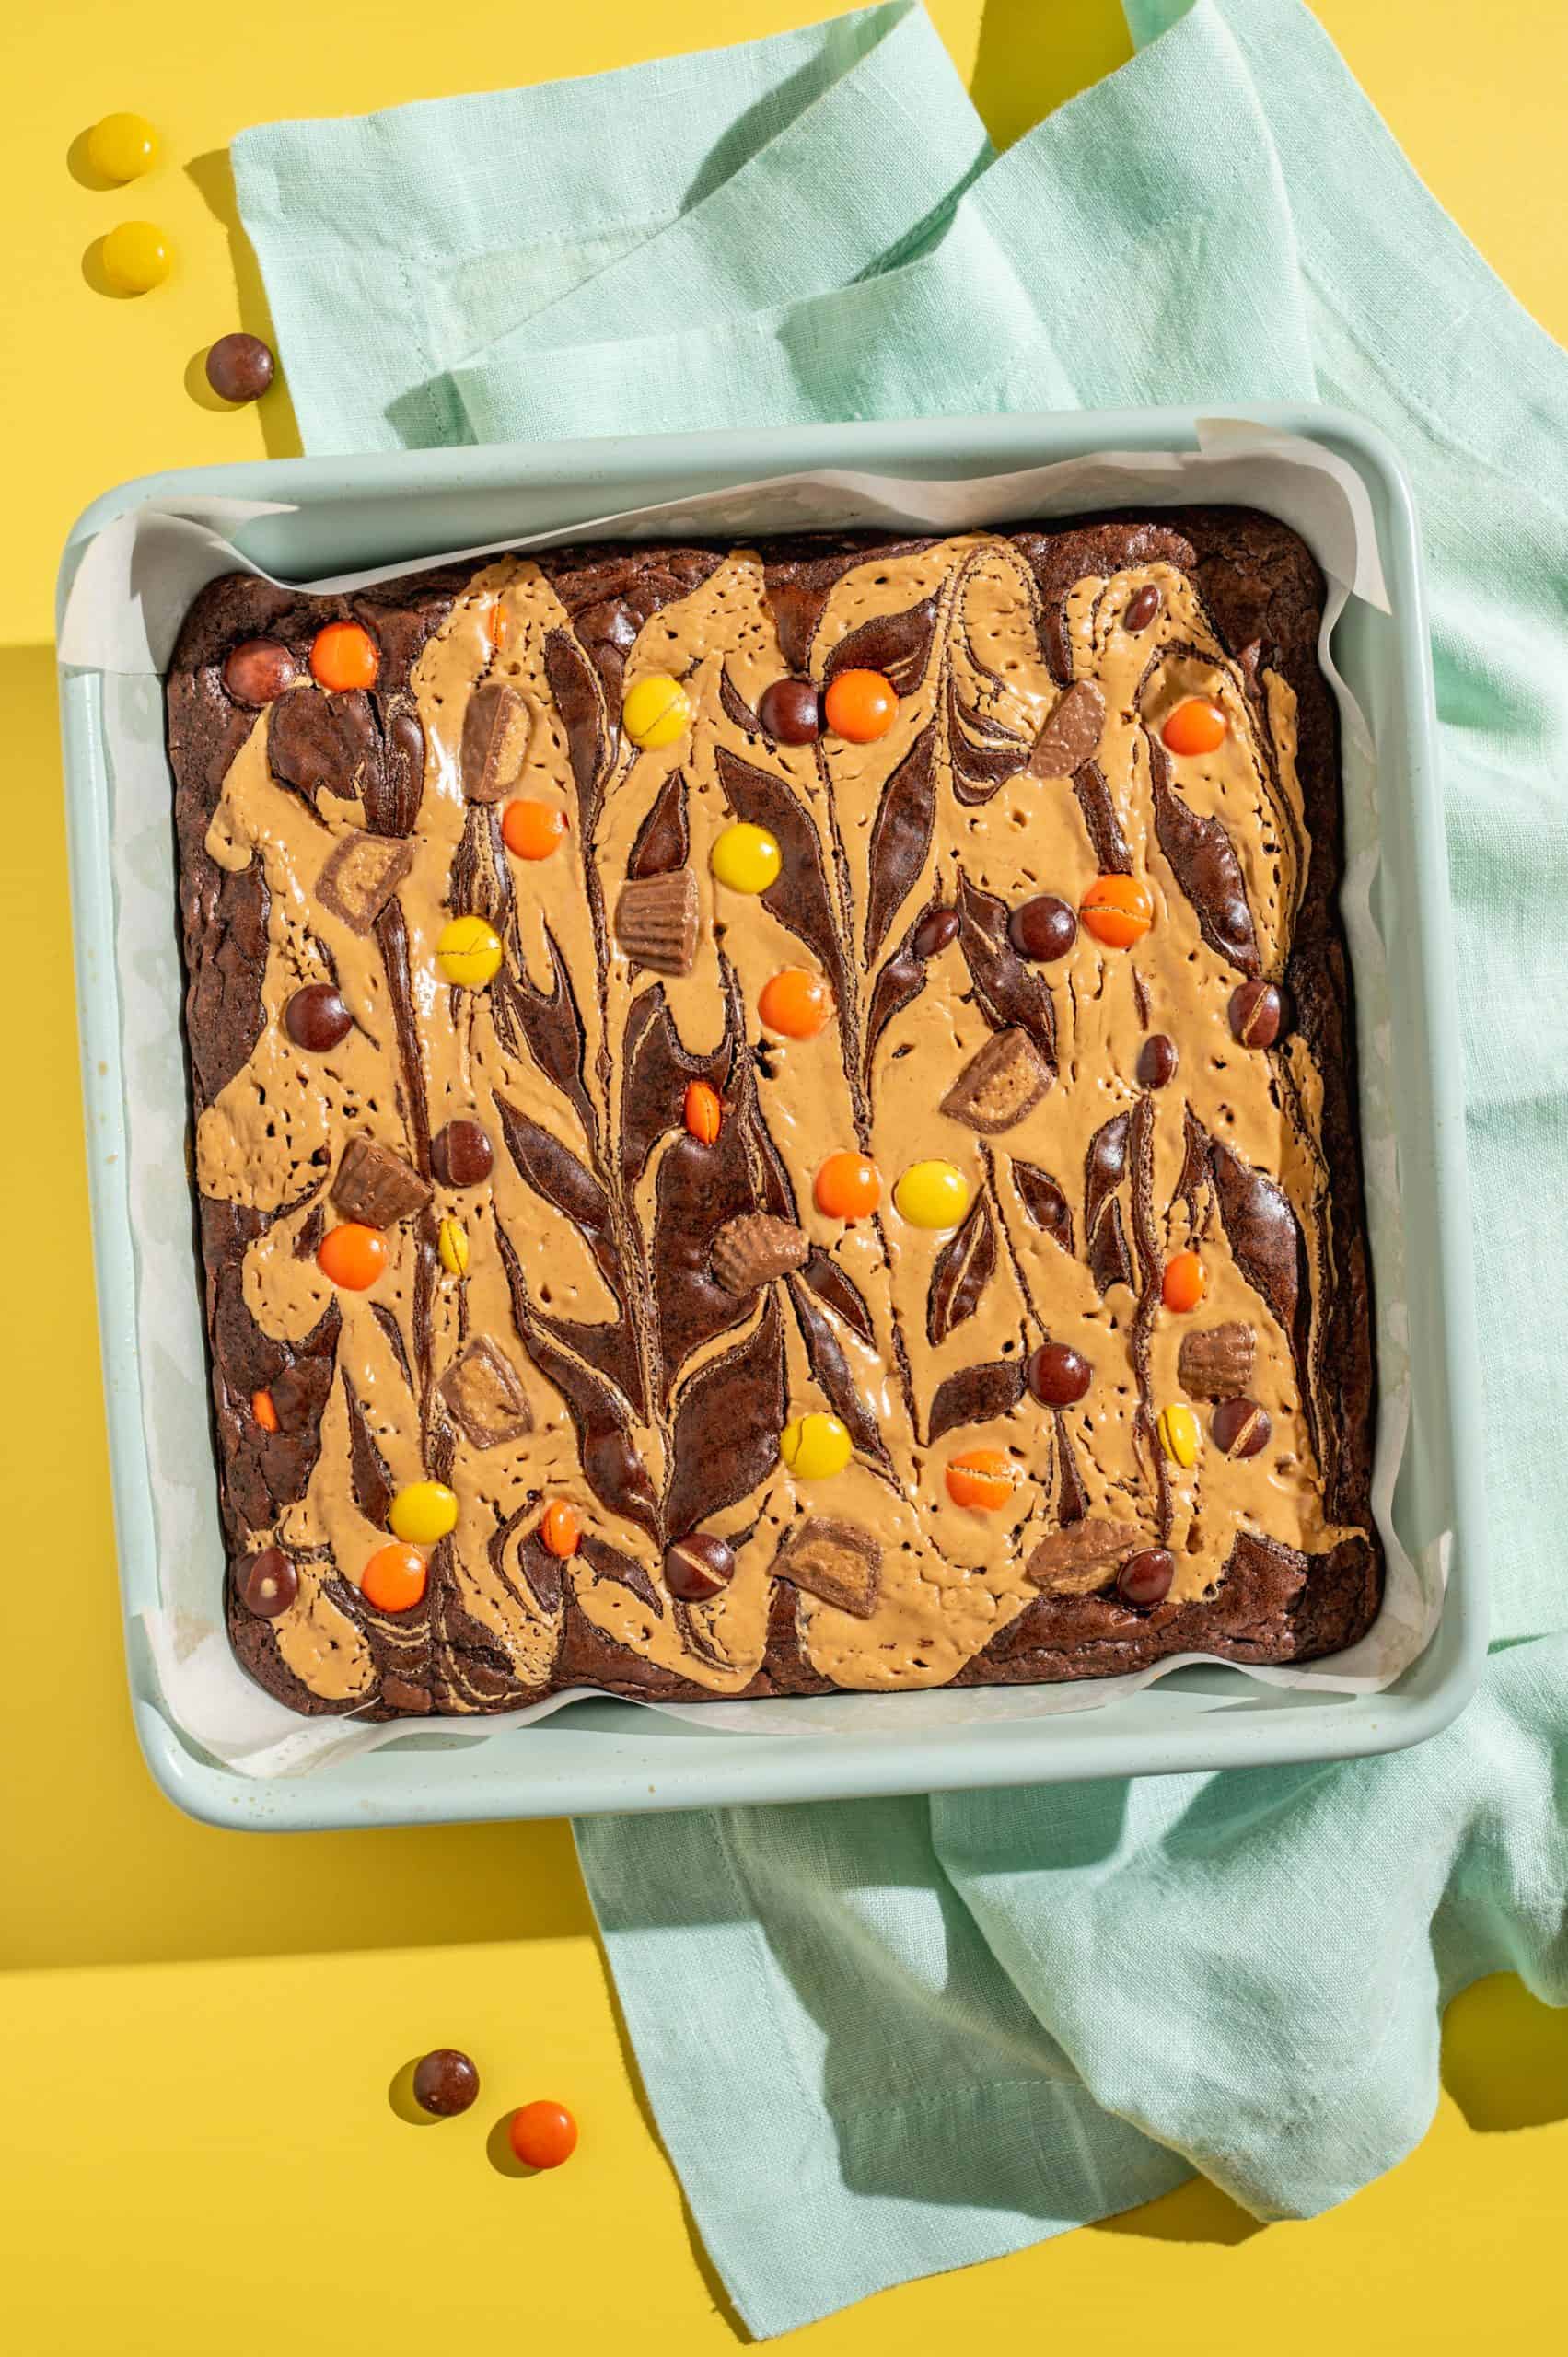 Peanut butter swirled Reese's pieces brownies in a pan after baking.